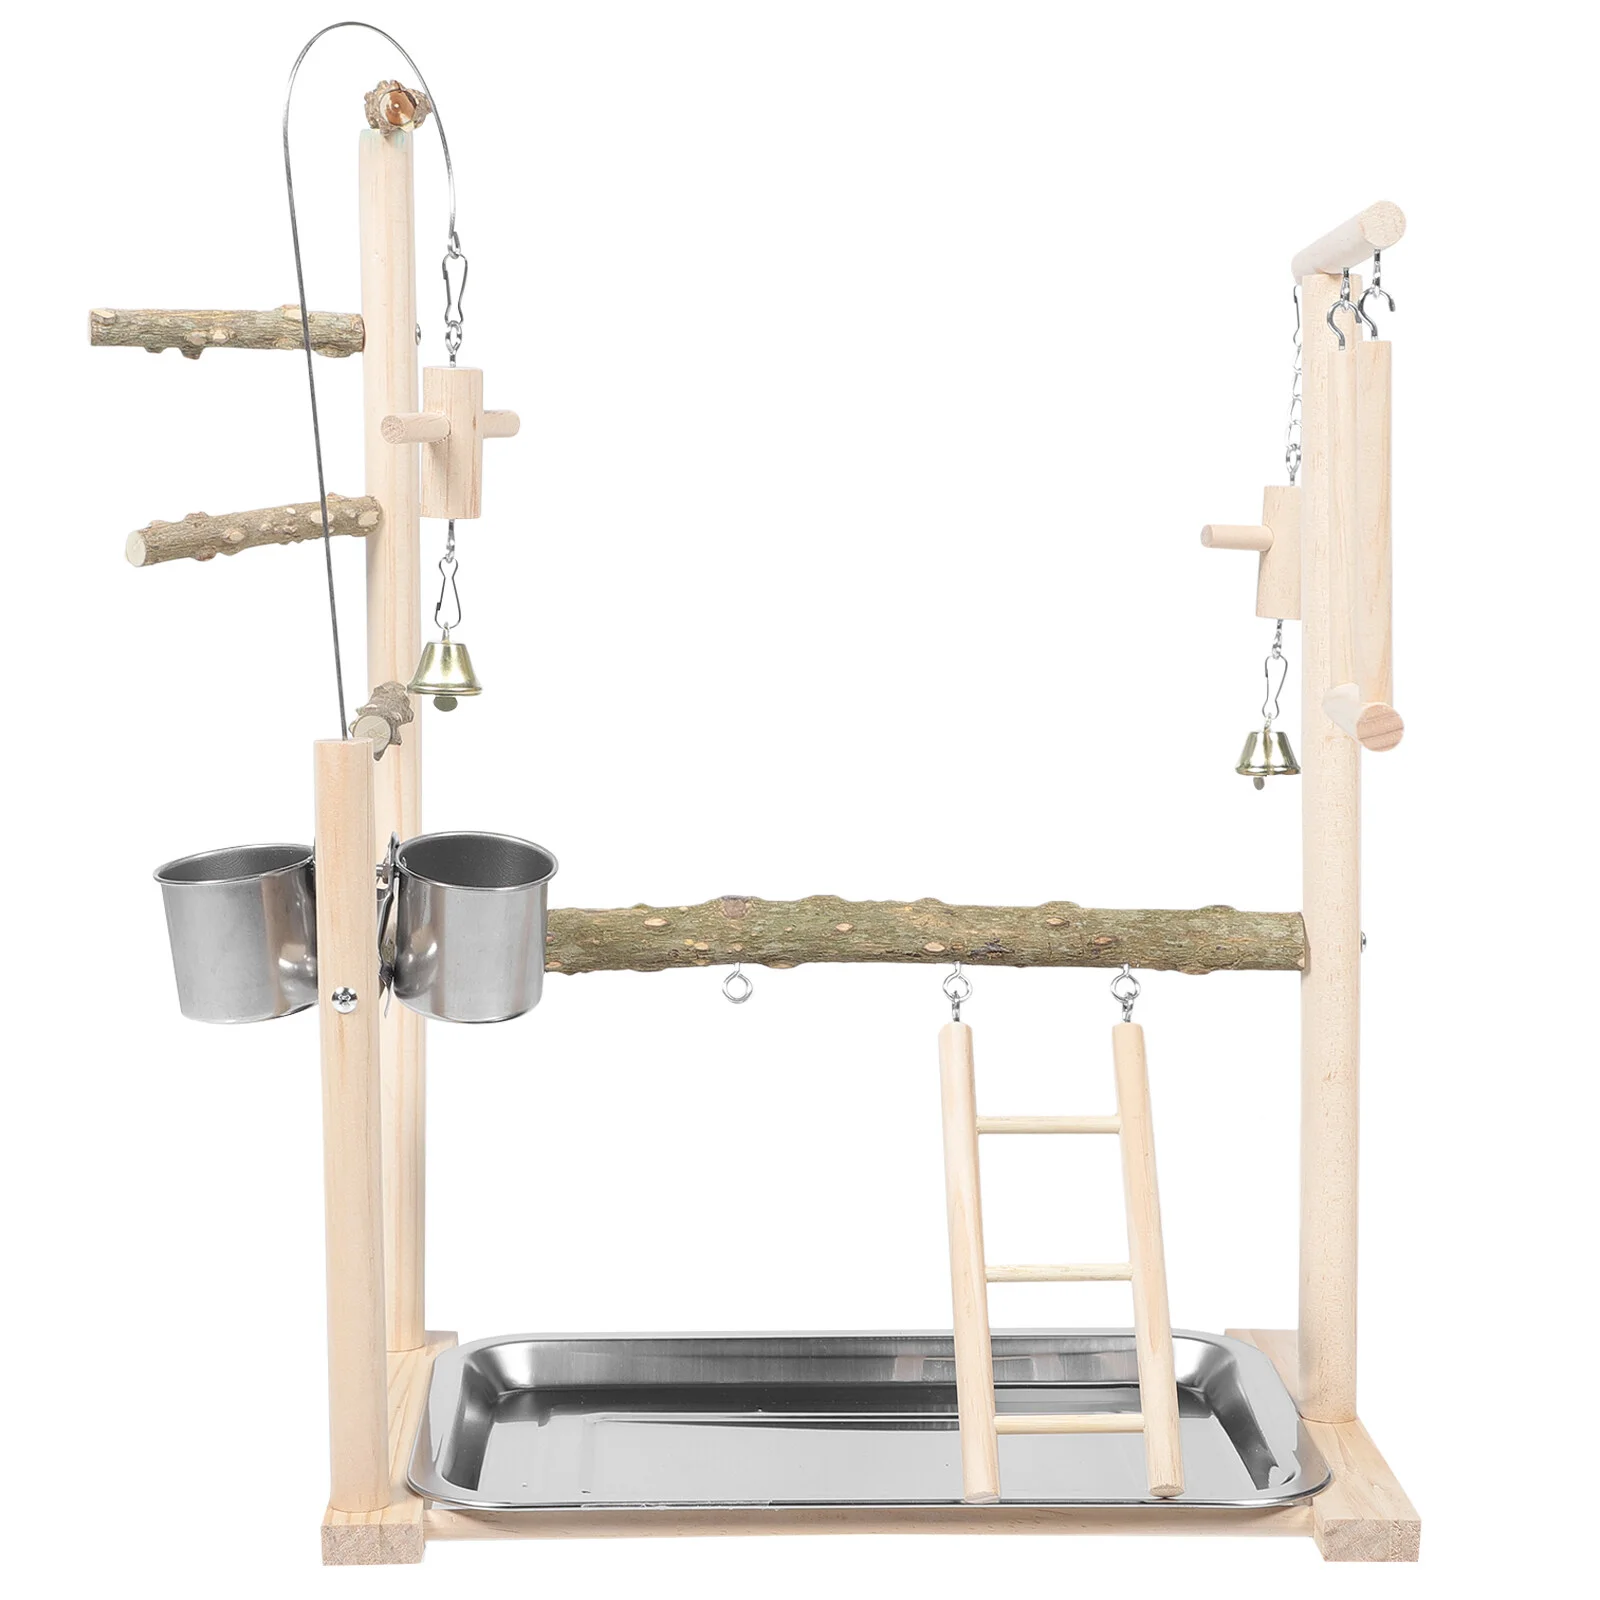 

The Swing Wooden Shelf Parakeet Perch Stand Parrot Accessory Bird Training Rack Natural Playground Birds Tabletop Office Toy